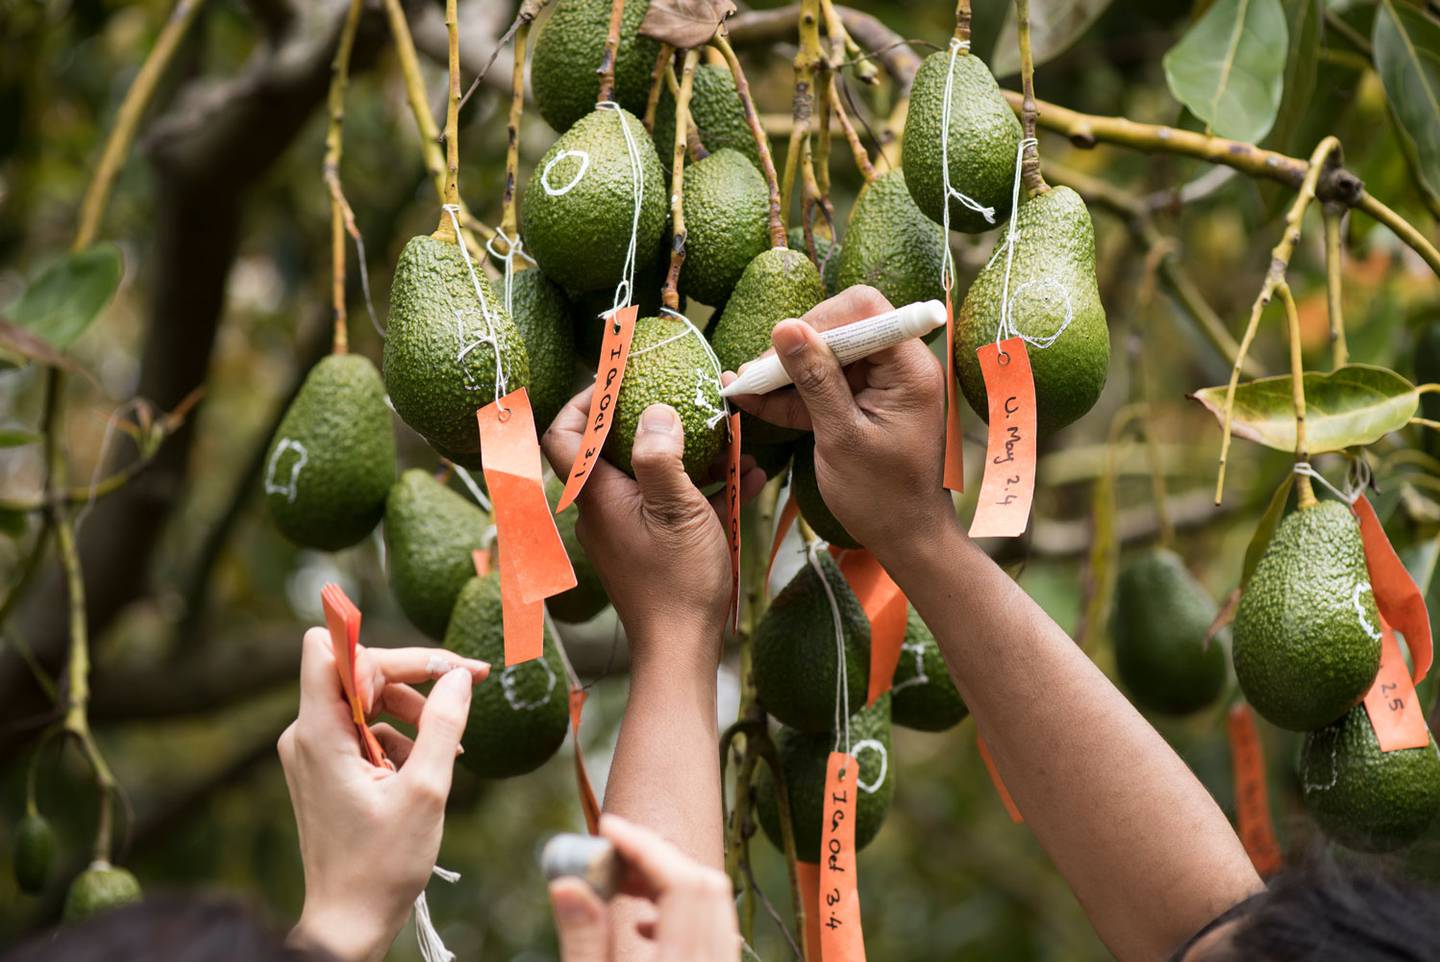 Scientists in New Zealand aims to create the perfect avocado for cold regions